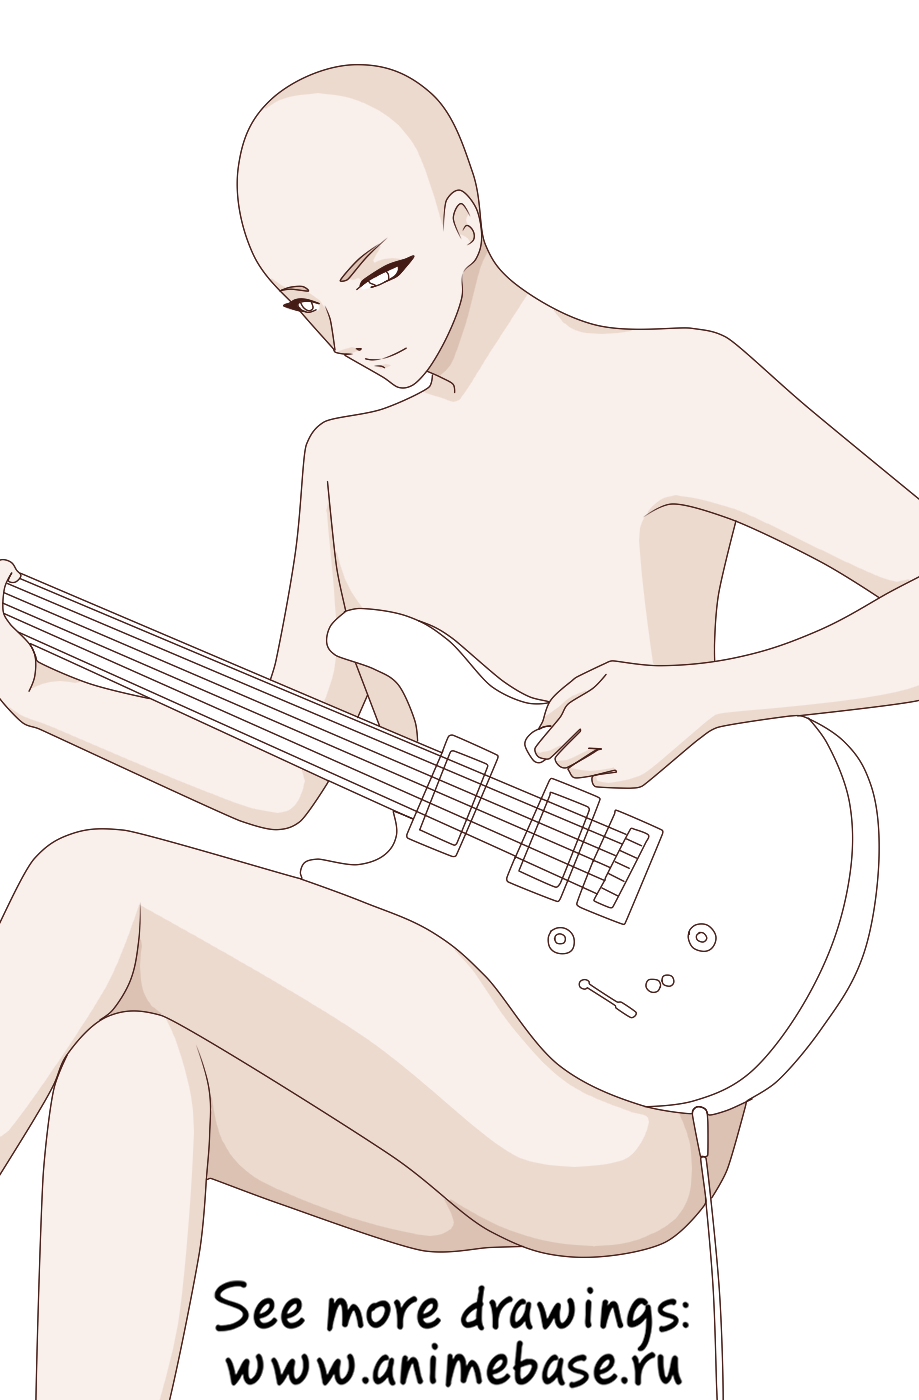 cool anime boy with guitar